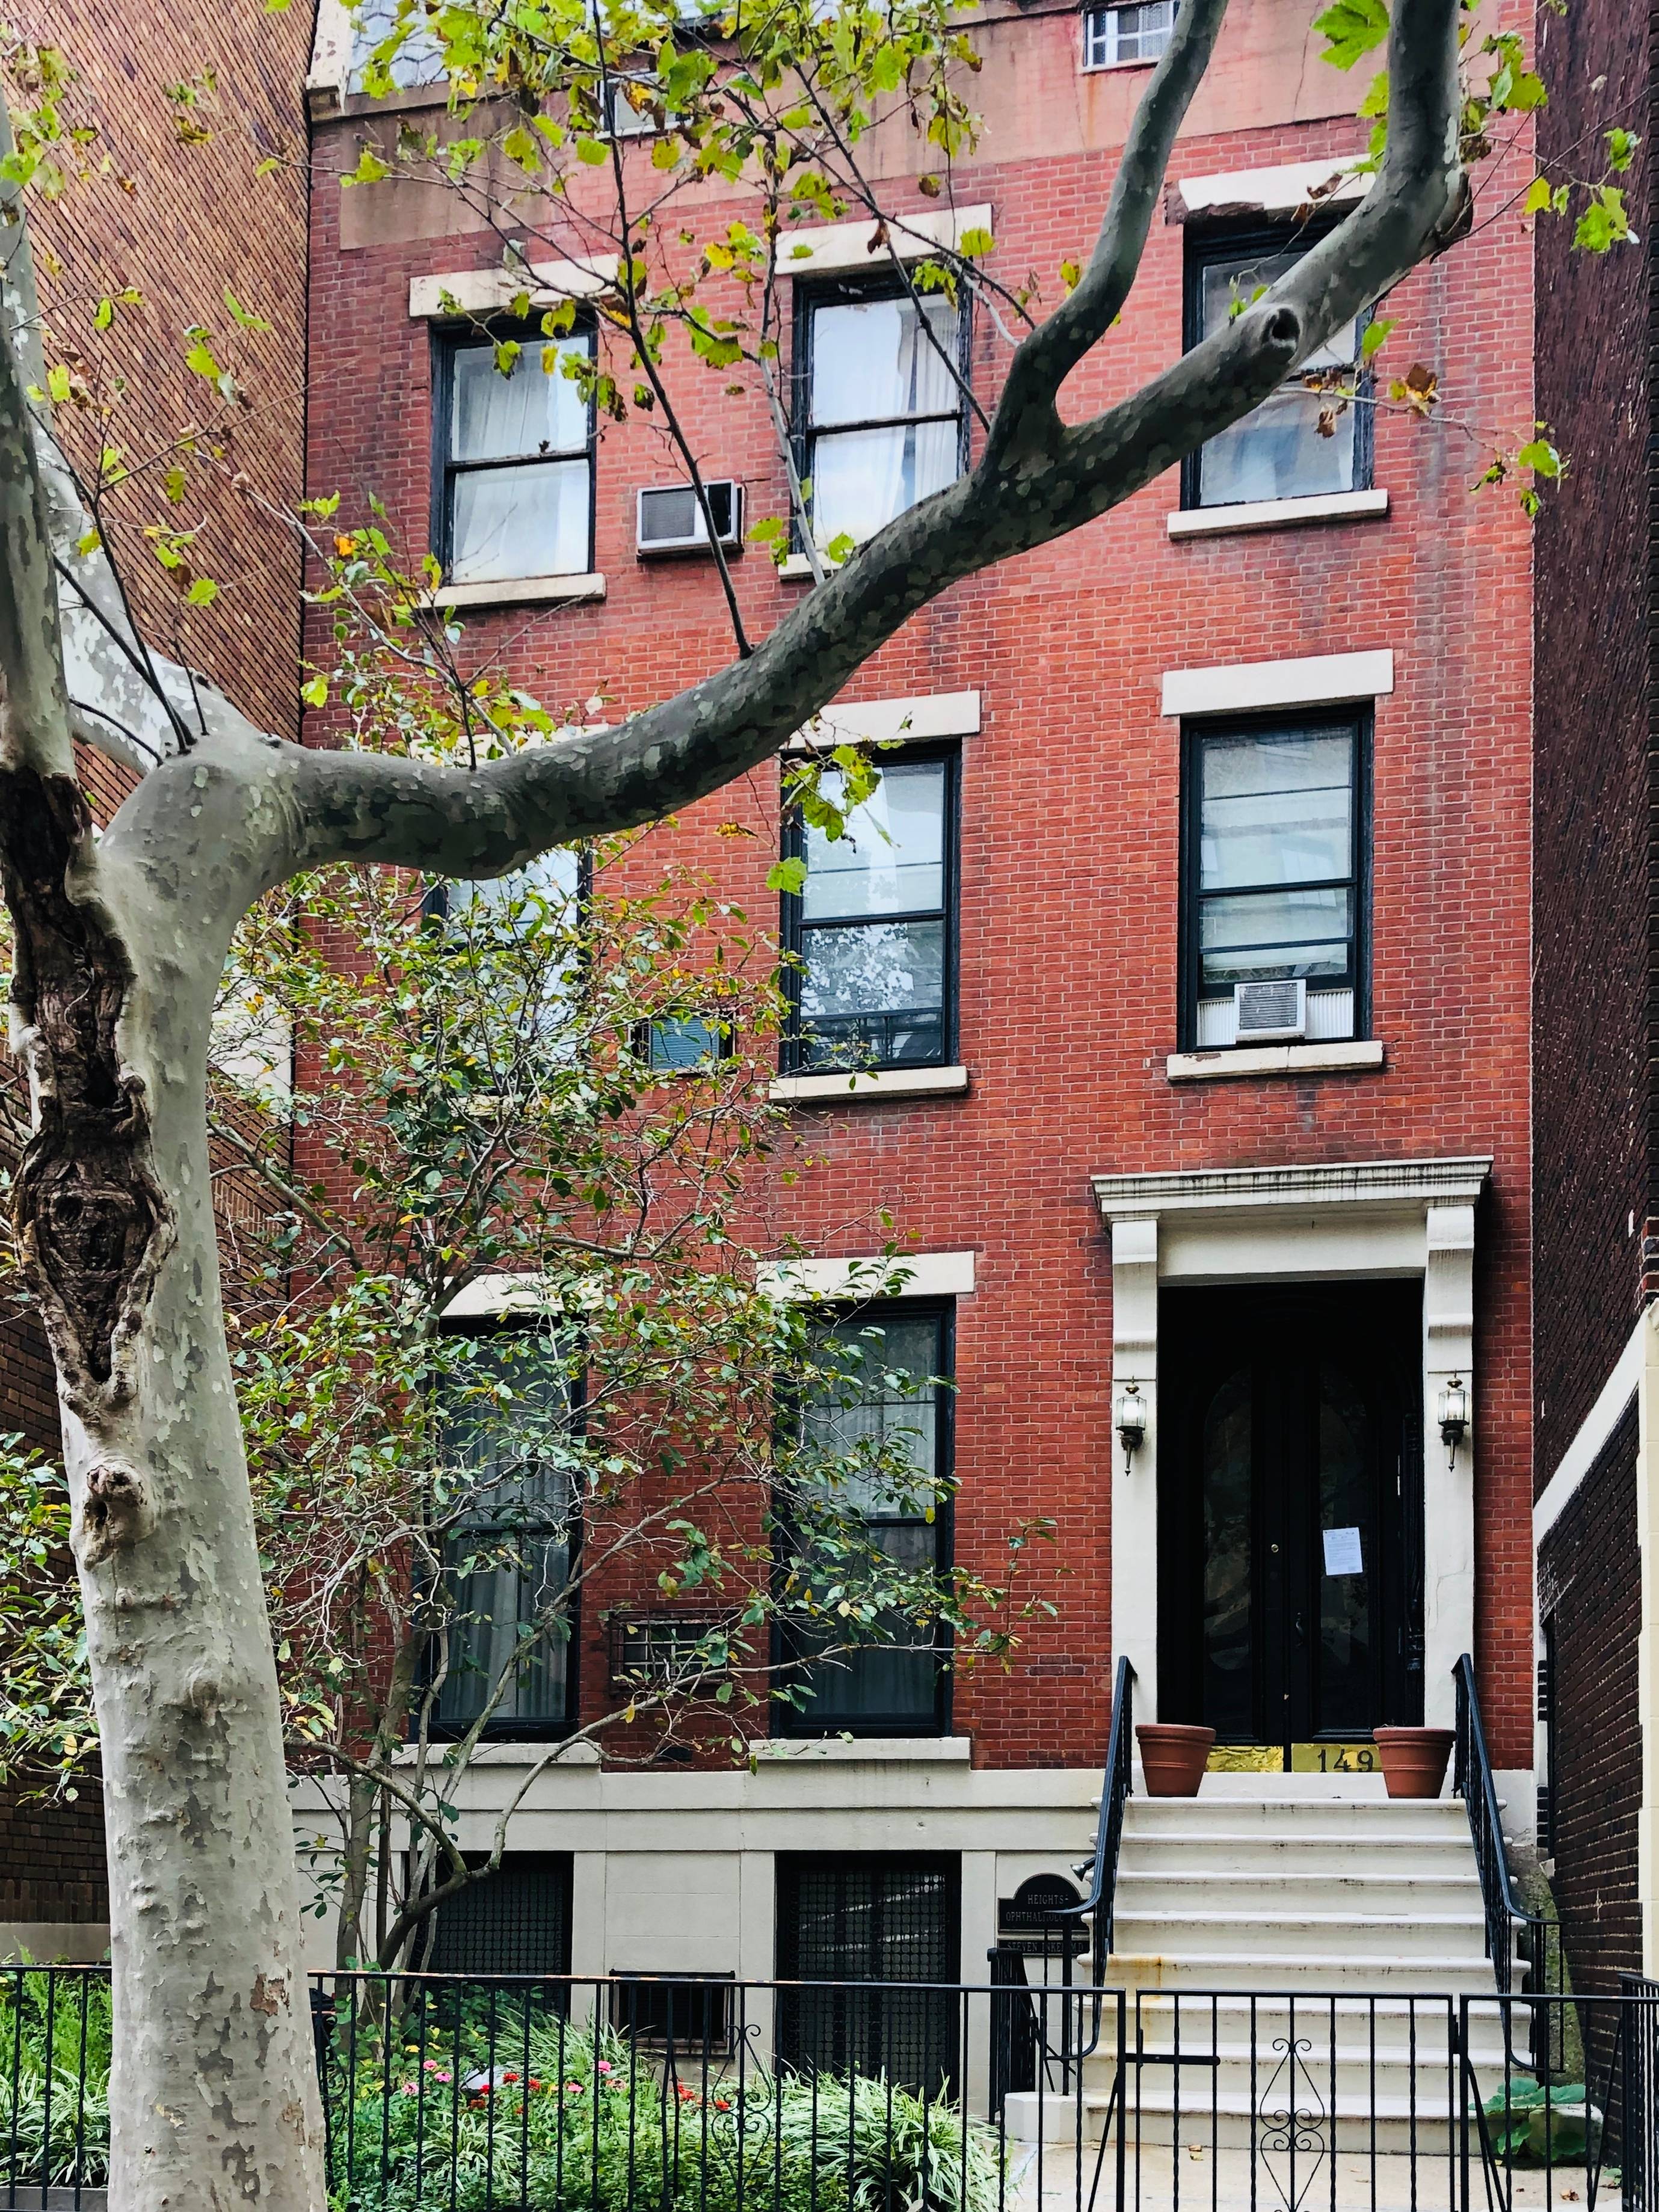 NO FEE Perched atop a picturesque brownstone located in the heart of Brooklyn Heights is your new home.